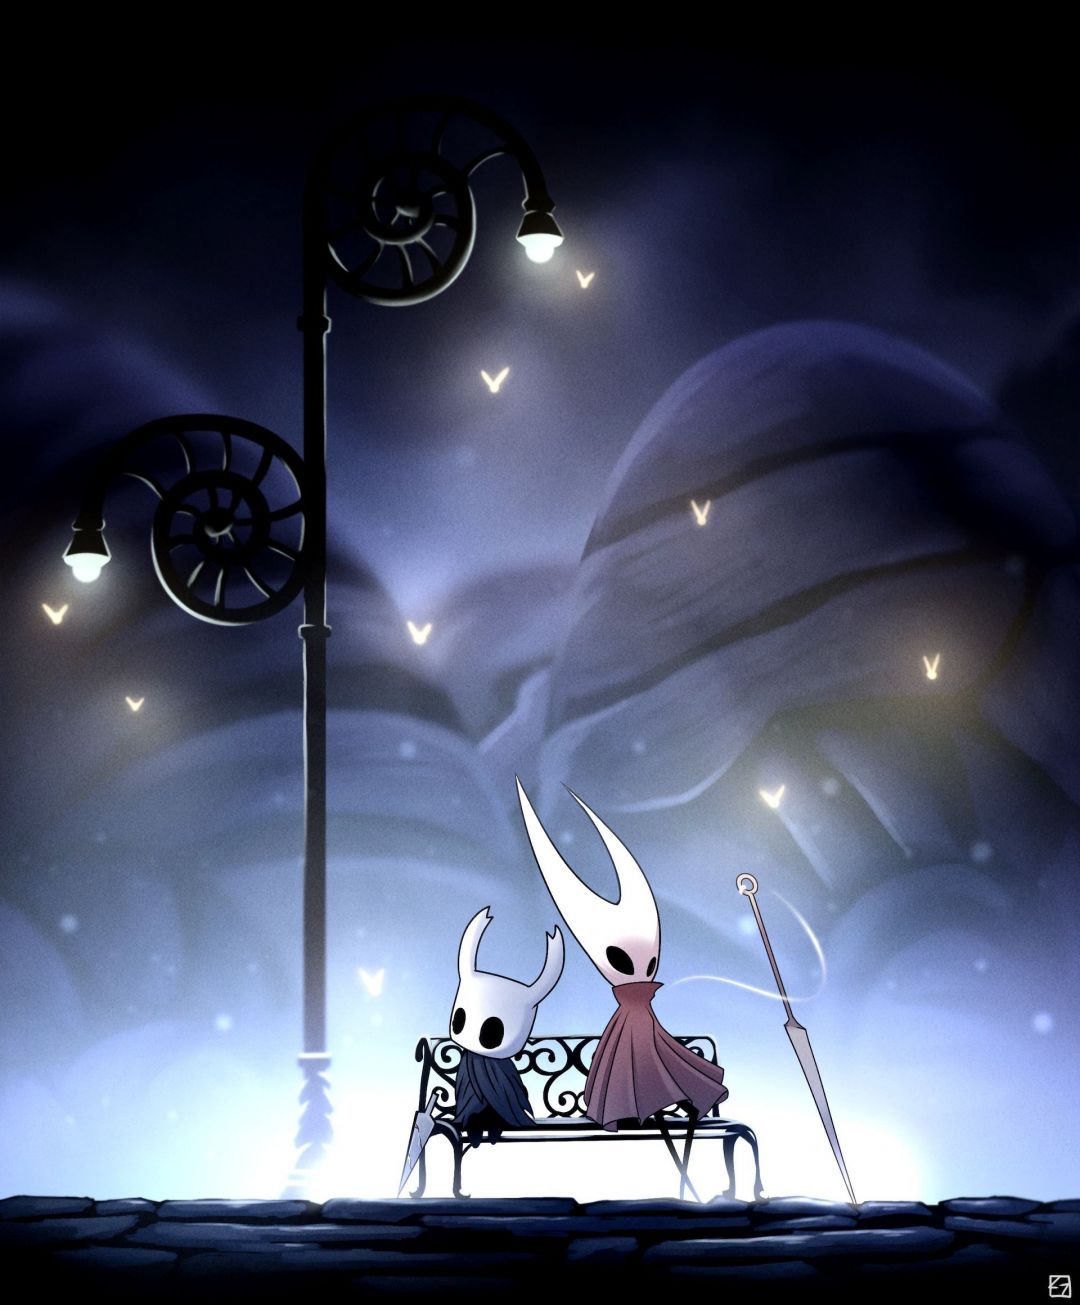 Android, Iphone, Desktop Hd Backgrounds / Wallpapers - Hollow Knight Wallpaper Phone - HD Wallpaper 